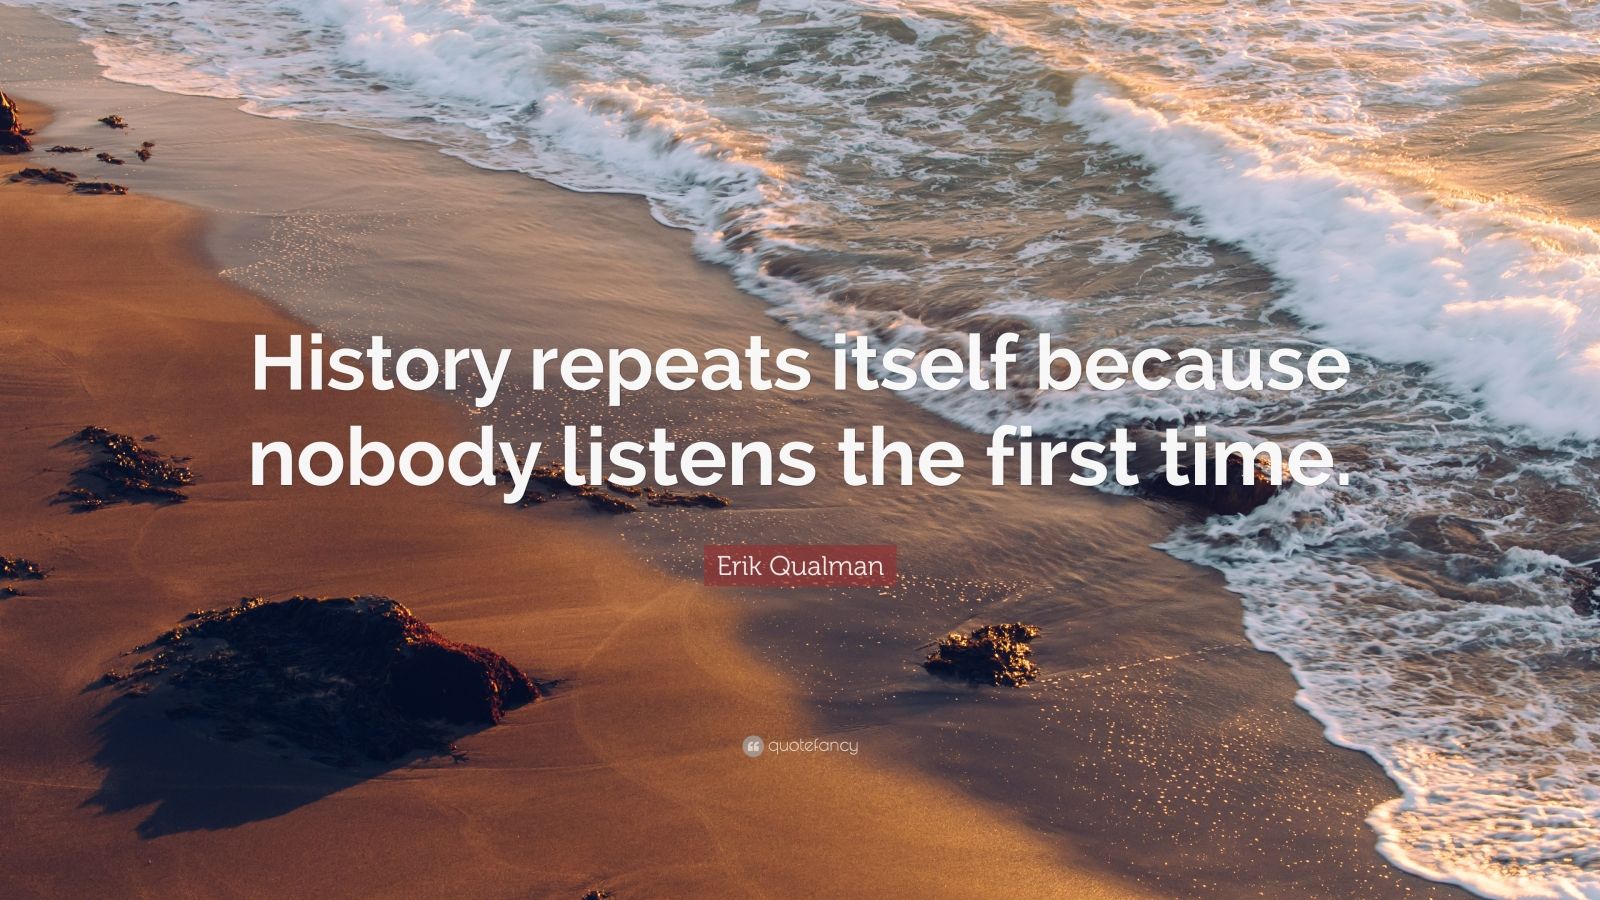 History Repeats Itself Quote : Famous quotes about 'History Repeats Itself' - QuotationOf ... / Find a list of matching phrases on phrases.com!